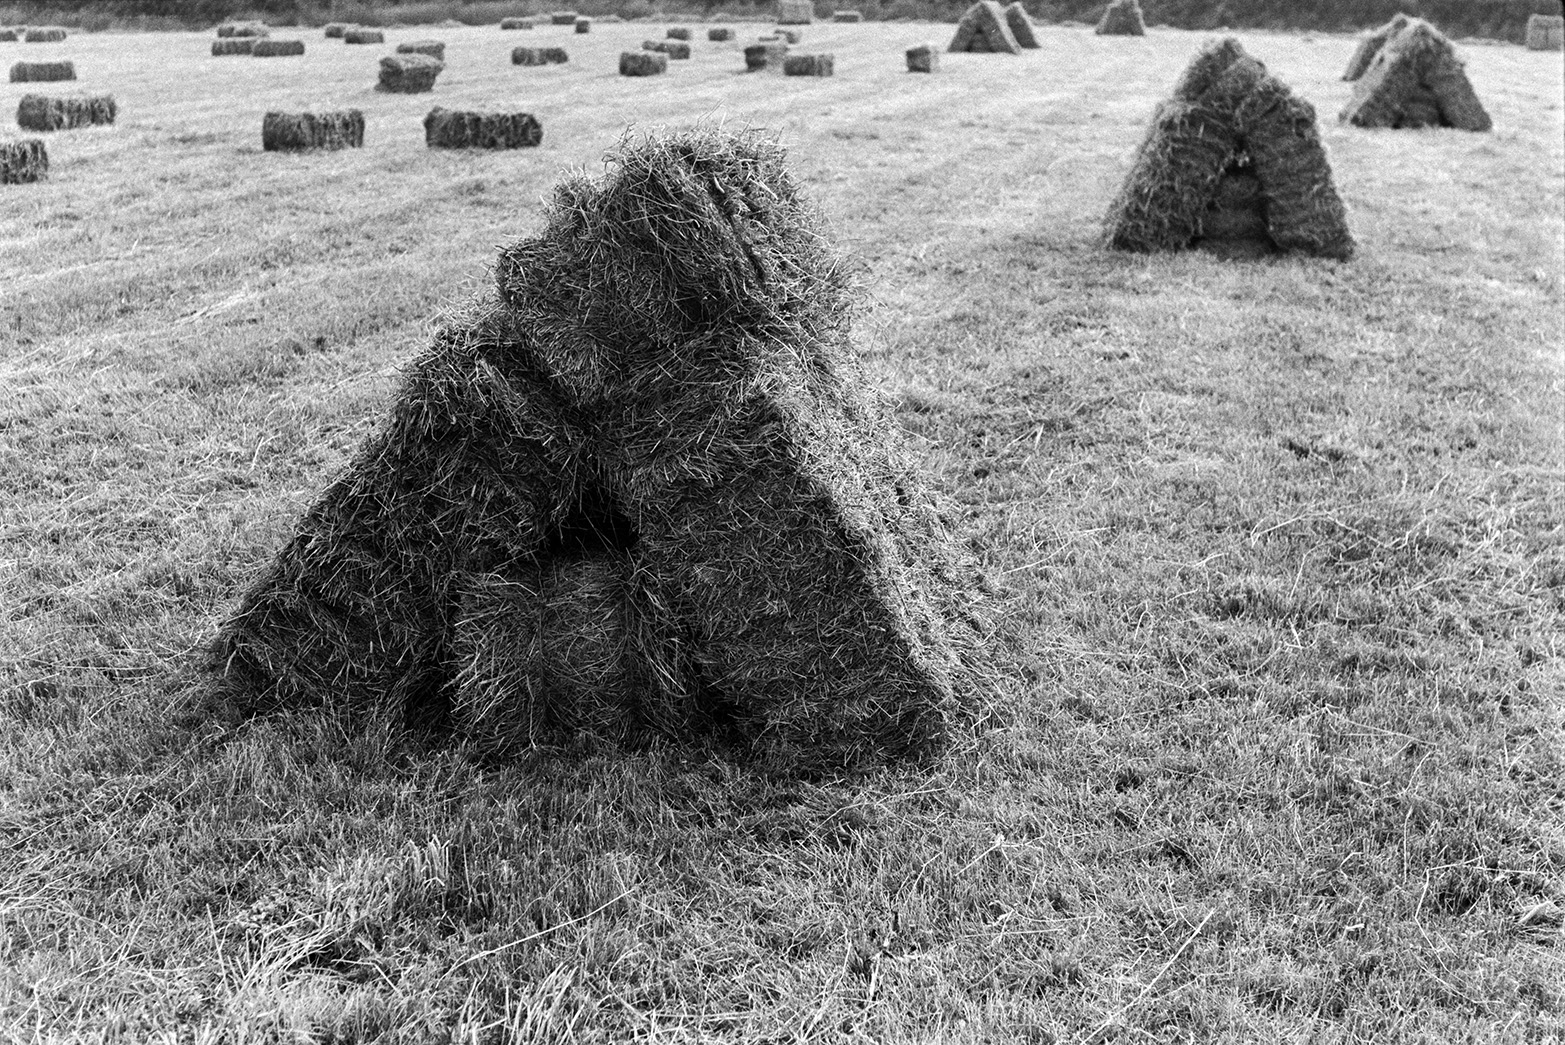 Stacks of hay bales in a field at Mill Road Farm, Beaford. The farm was also known as Jeffrys.